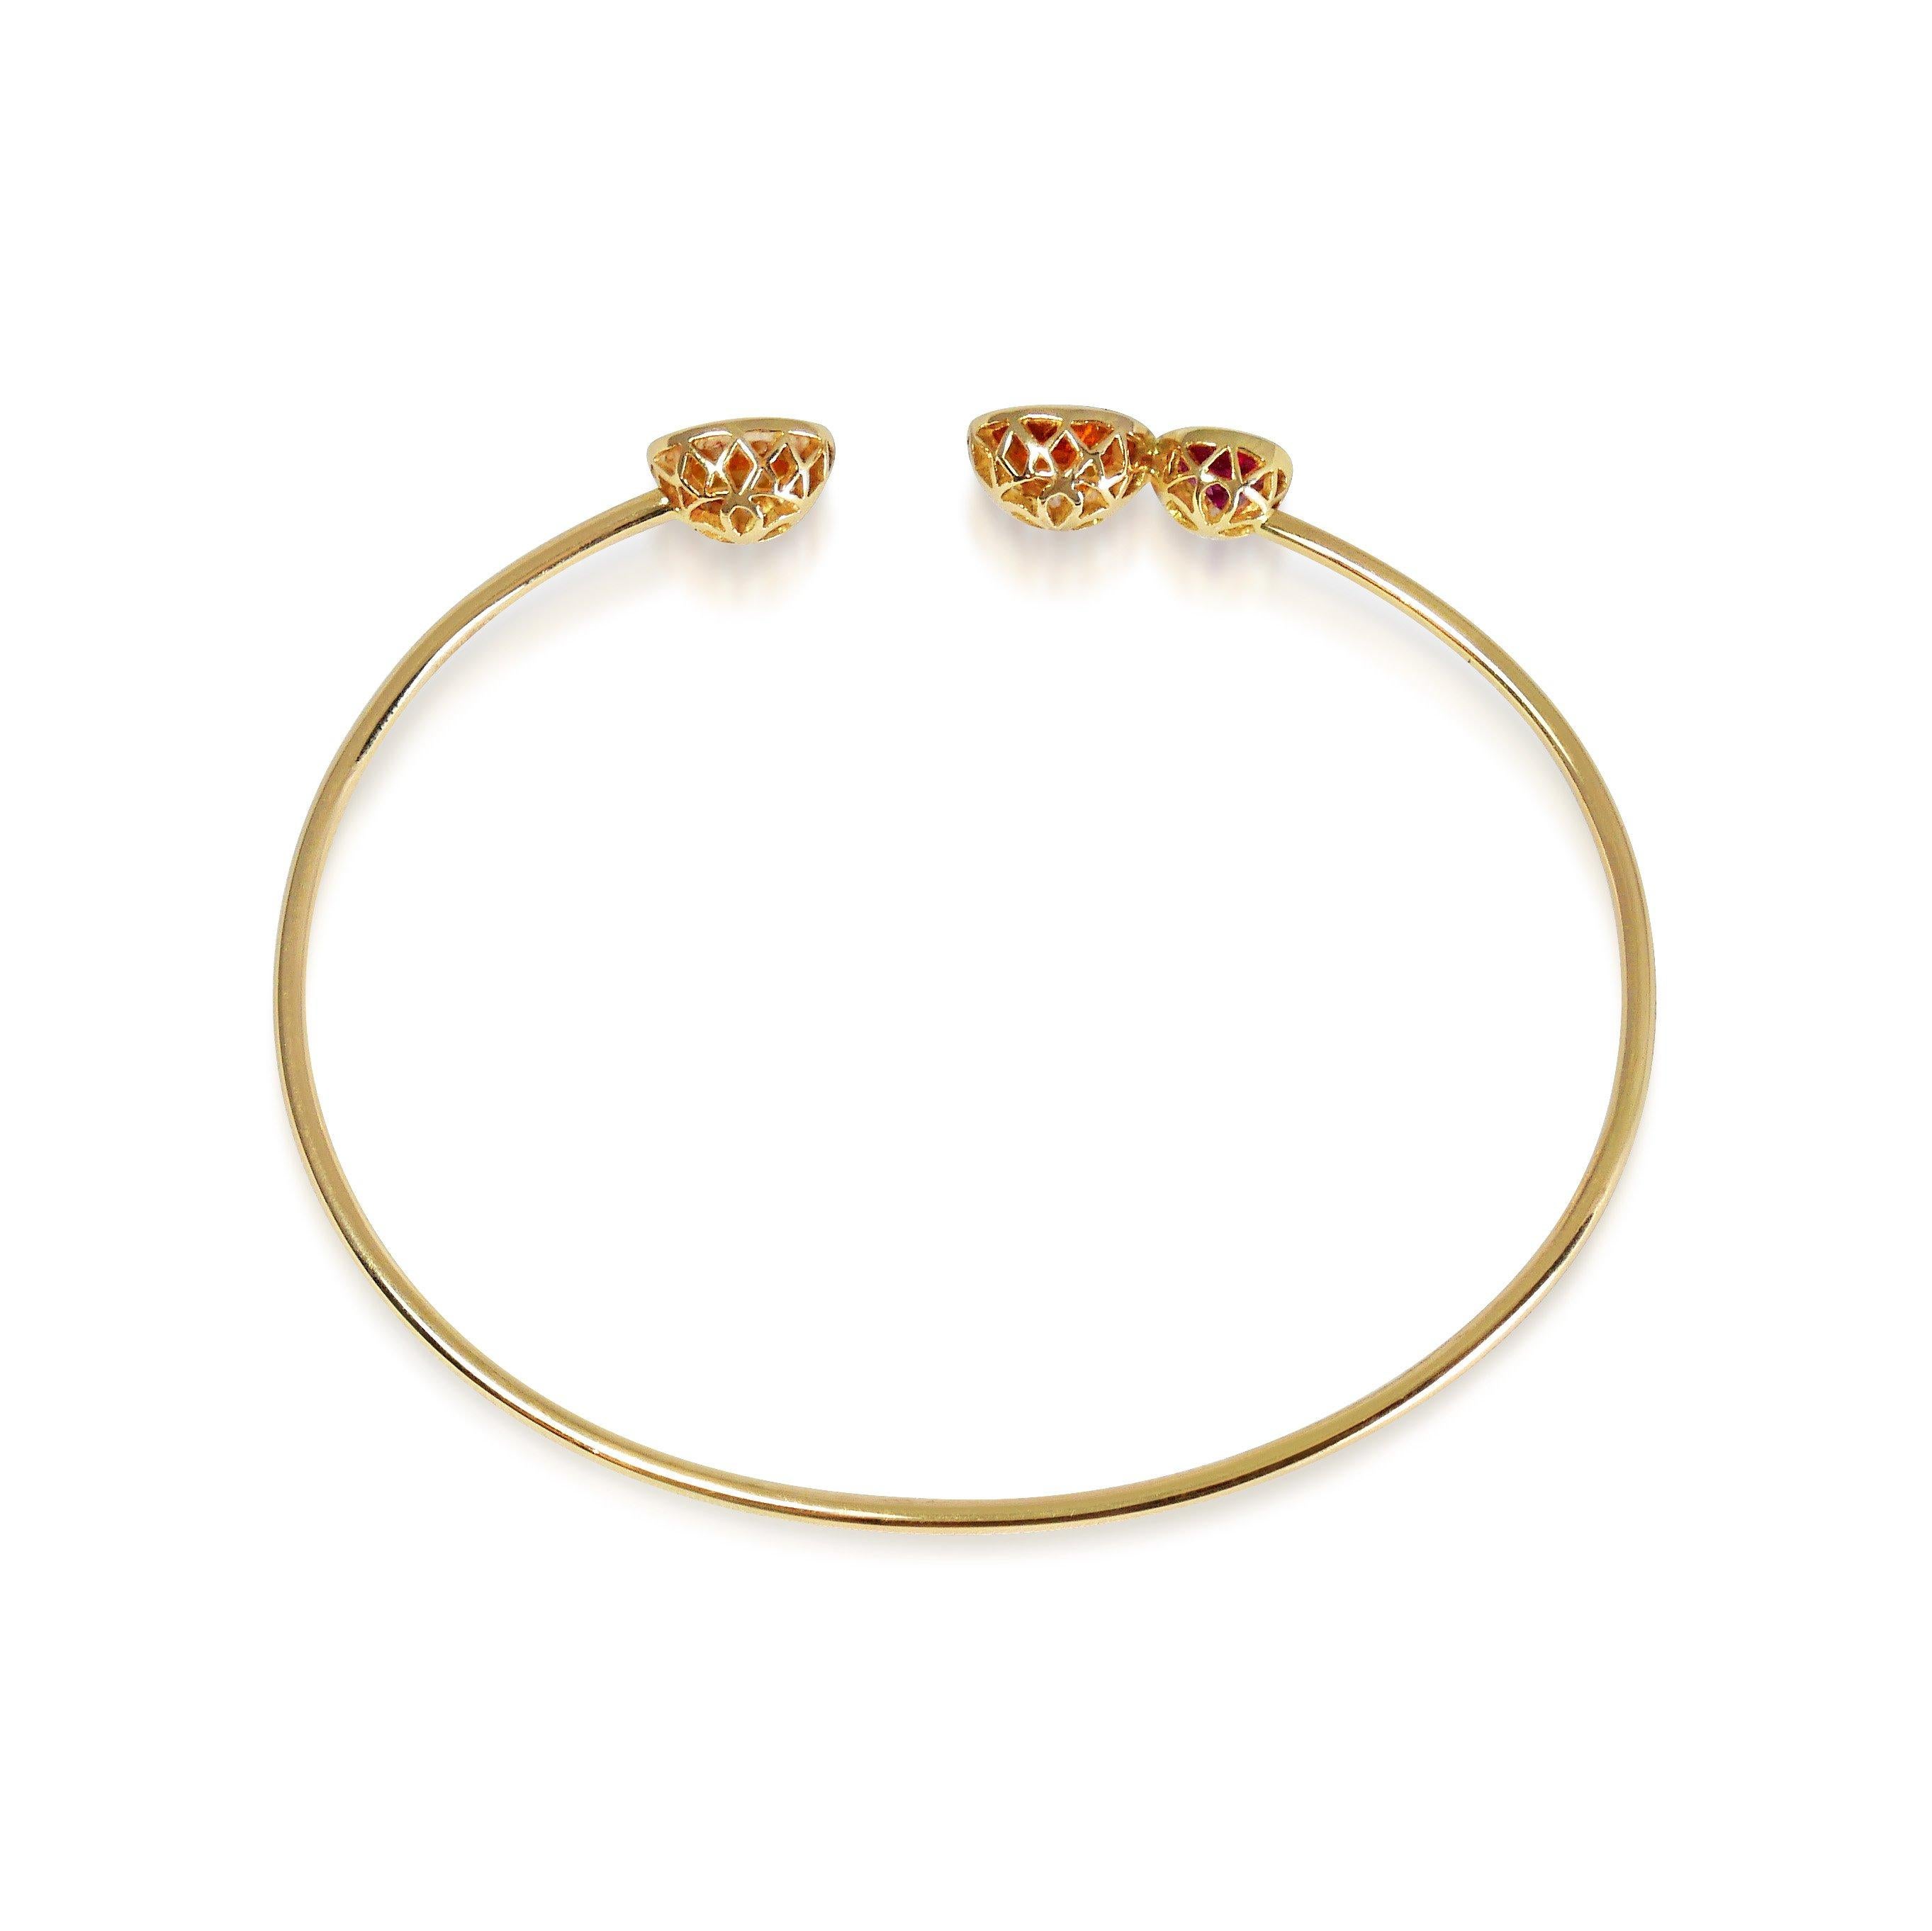 Handcrafted 0,55 Carat Pink Tourmaline & 2,00 Carat Orange Sapphires 18 Karat Yellow Gold Open Bangle Bracelet. Designed as birds singing next to one another this bracelet combines a colorful range of precious gems. Our signature hand pierced lace